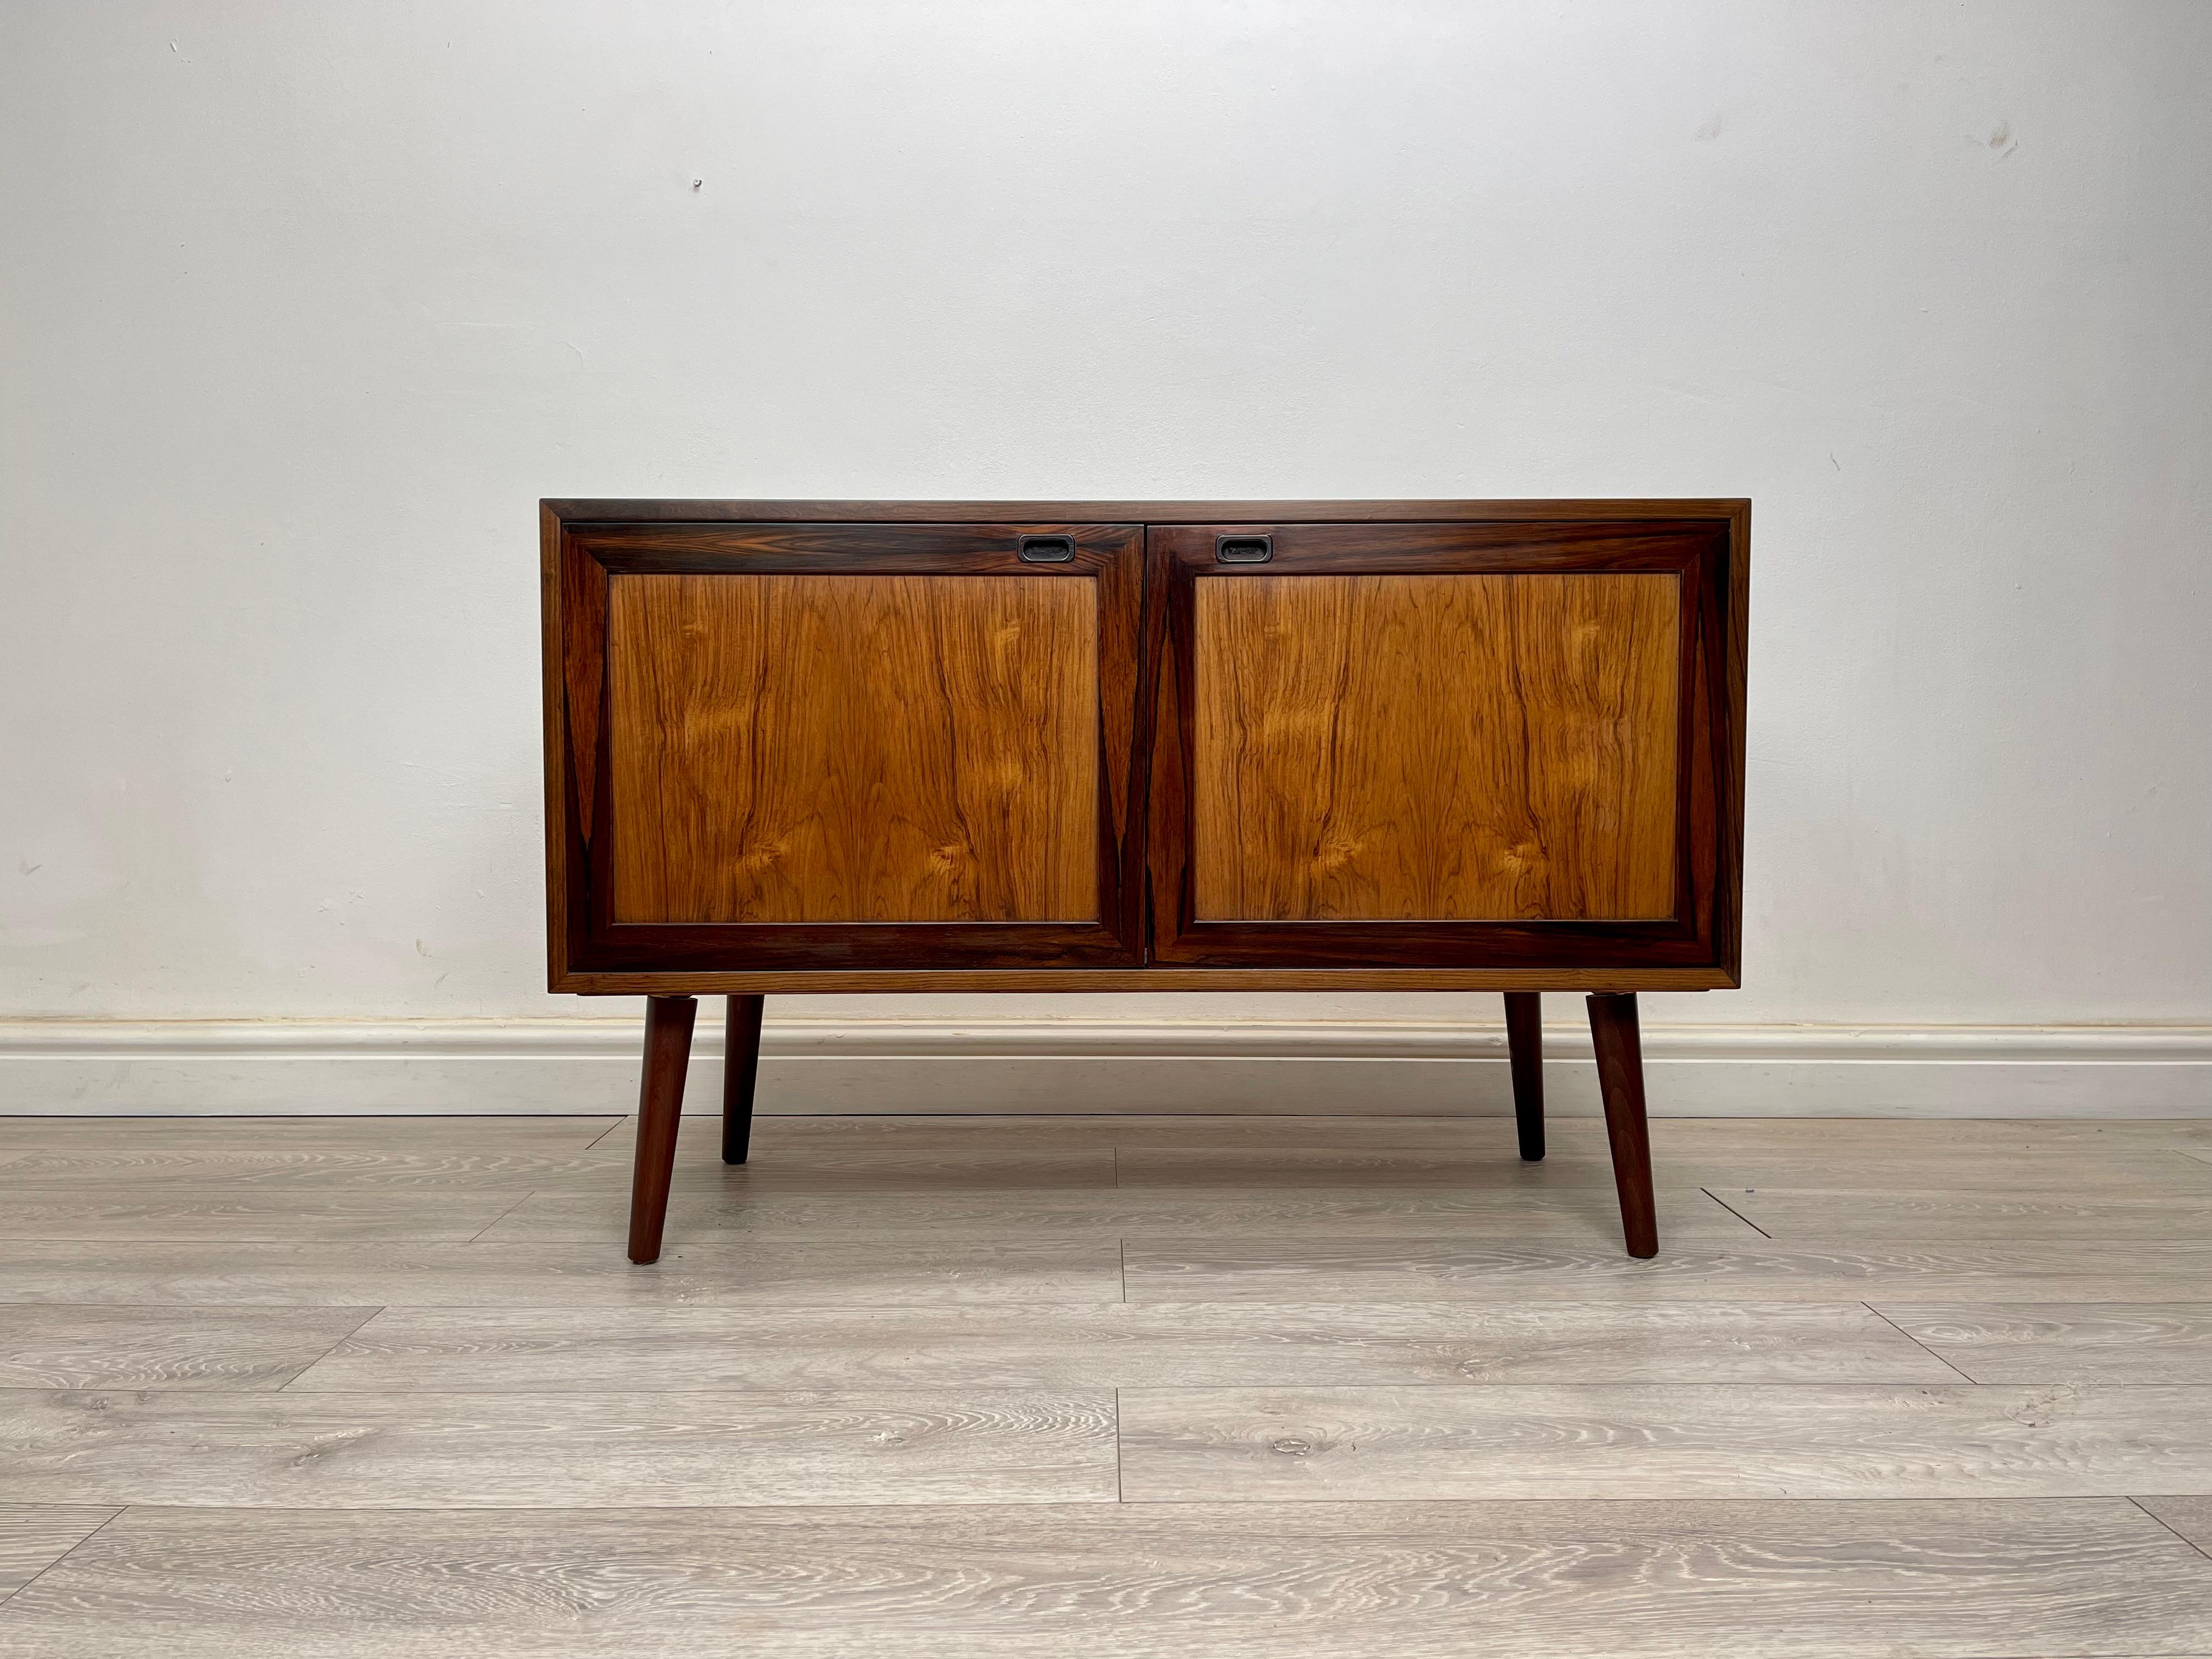 SIDEBOARD 
Midcentury Danish rosewood sideboard / cabinets circa 1970s. The cabinet has stunning grain throughout, stands on round dansette legs. There’s two single cupboards with adjustable shelves. 

Dimension 
Height- 72 cm 
Width- 110 cm